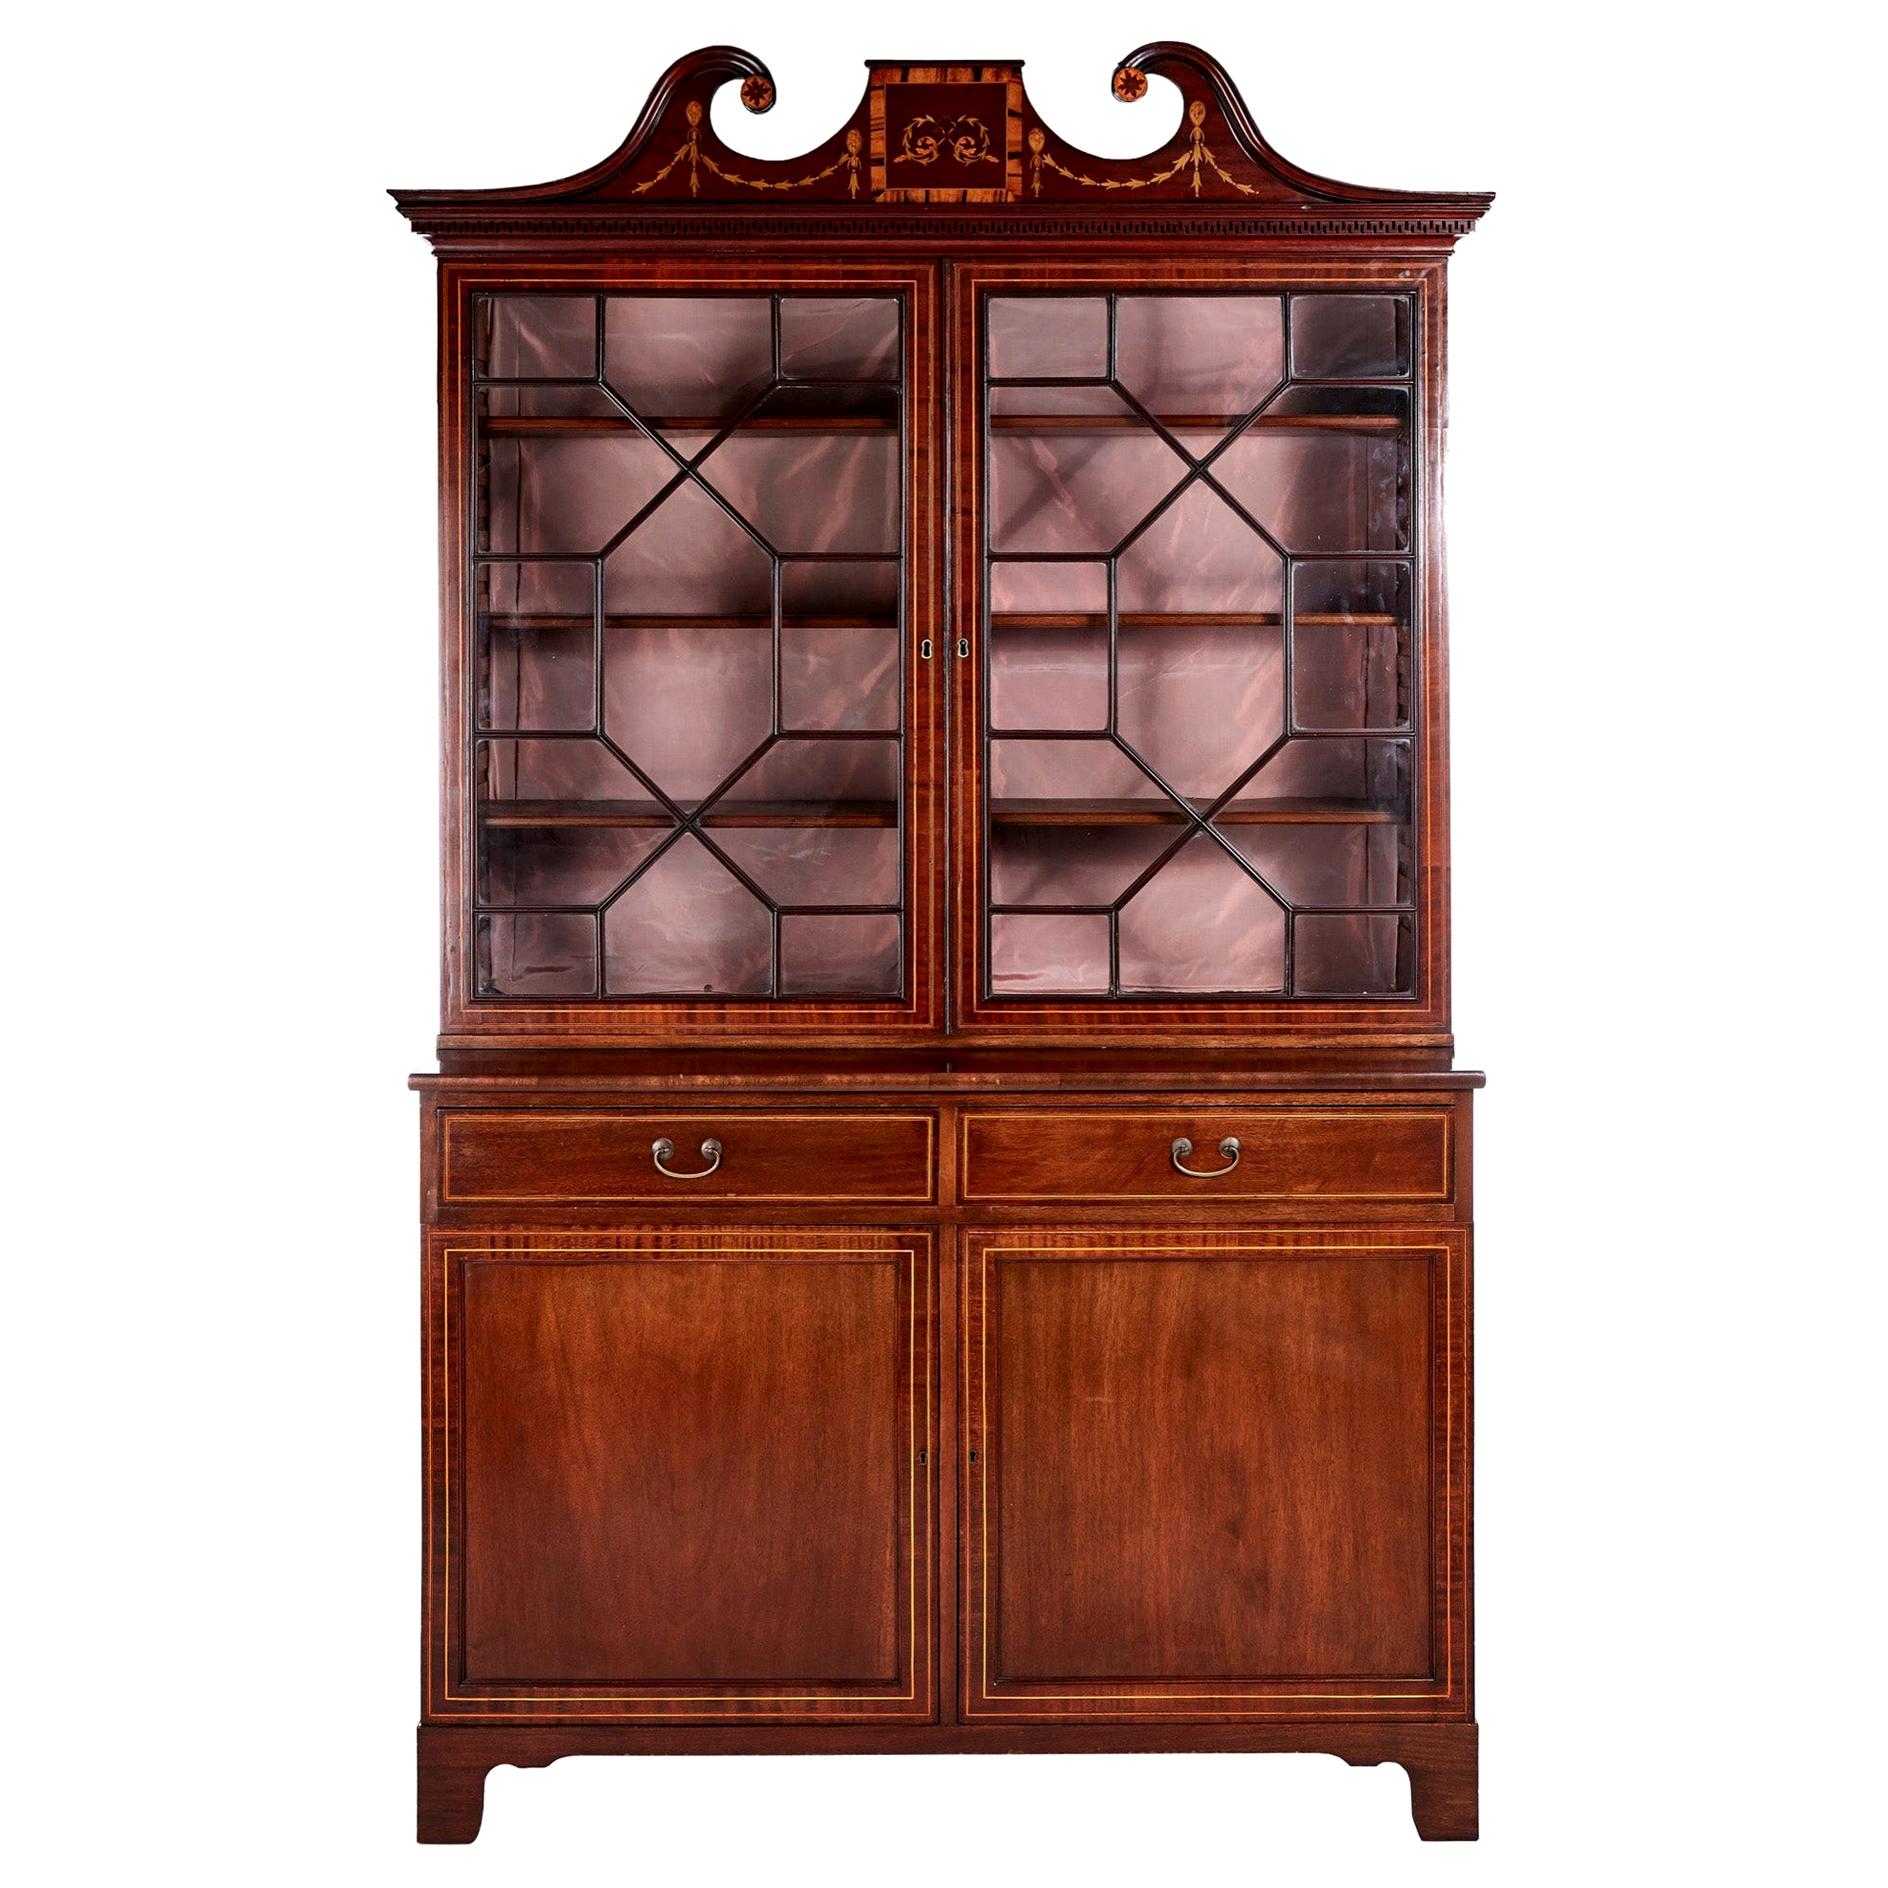 Outstanding Antique Mahogany Inlaid Bookcase For Sale